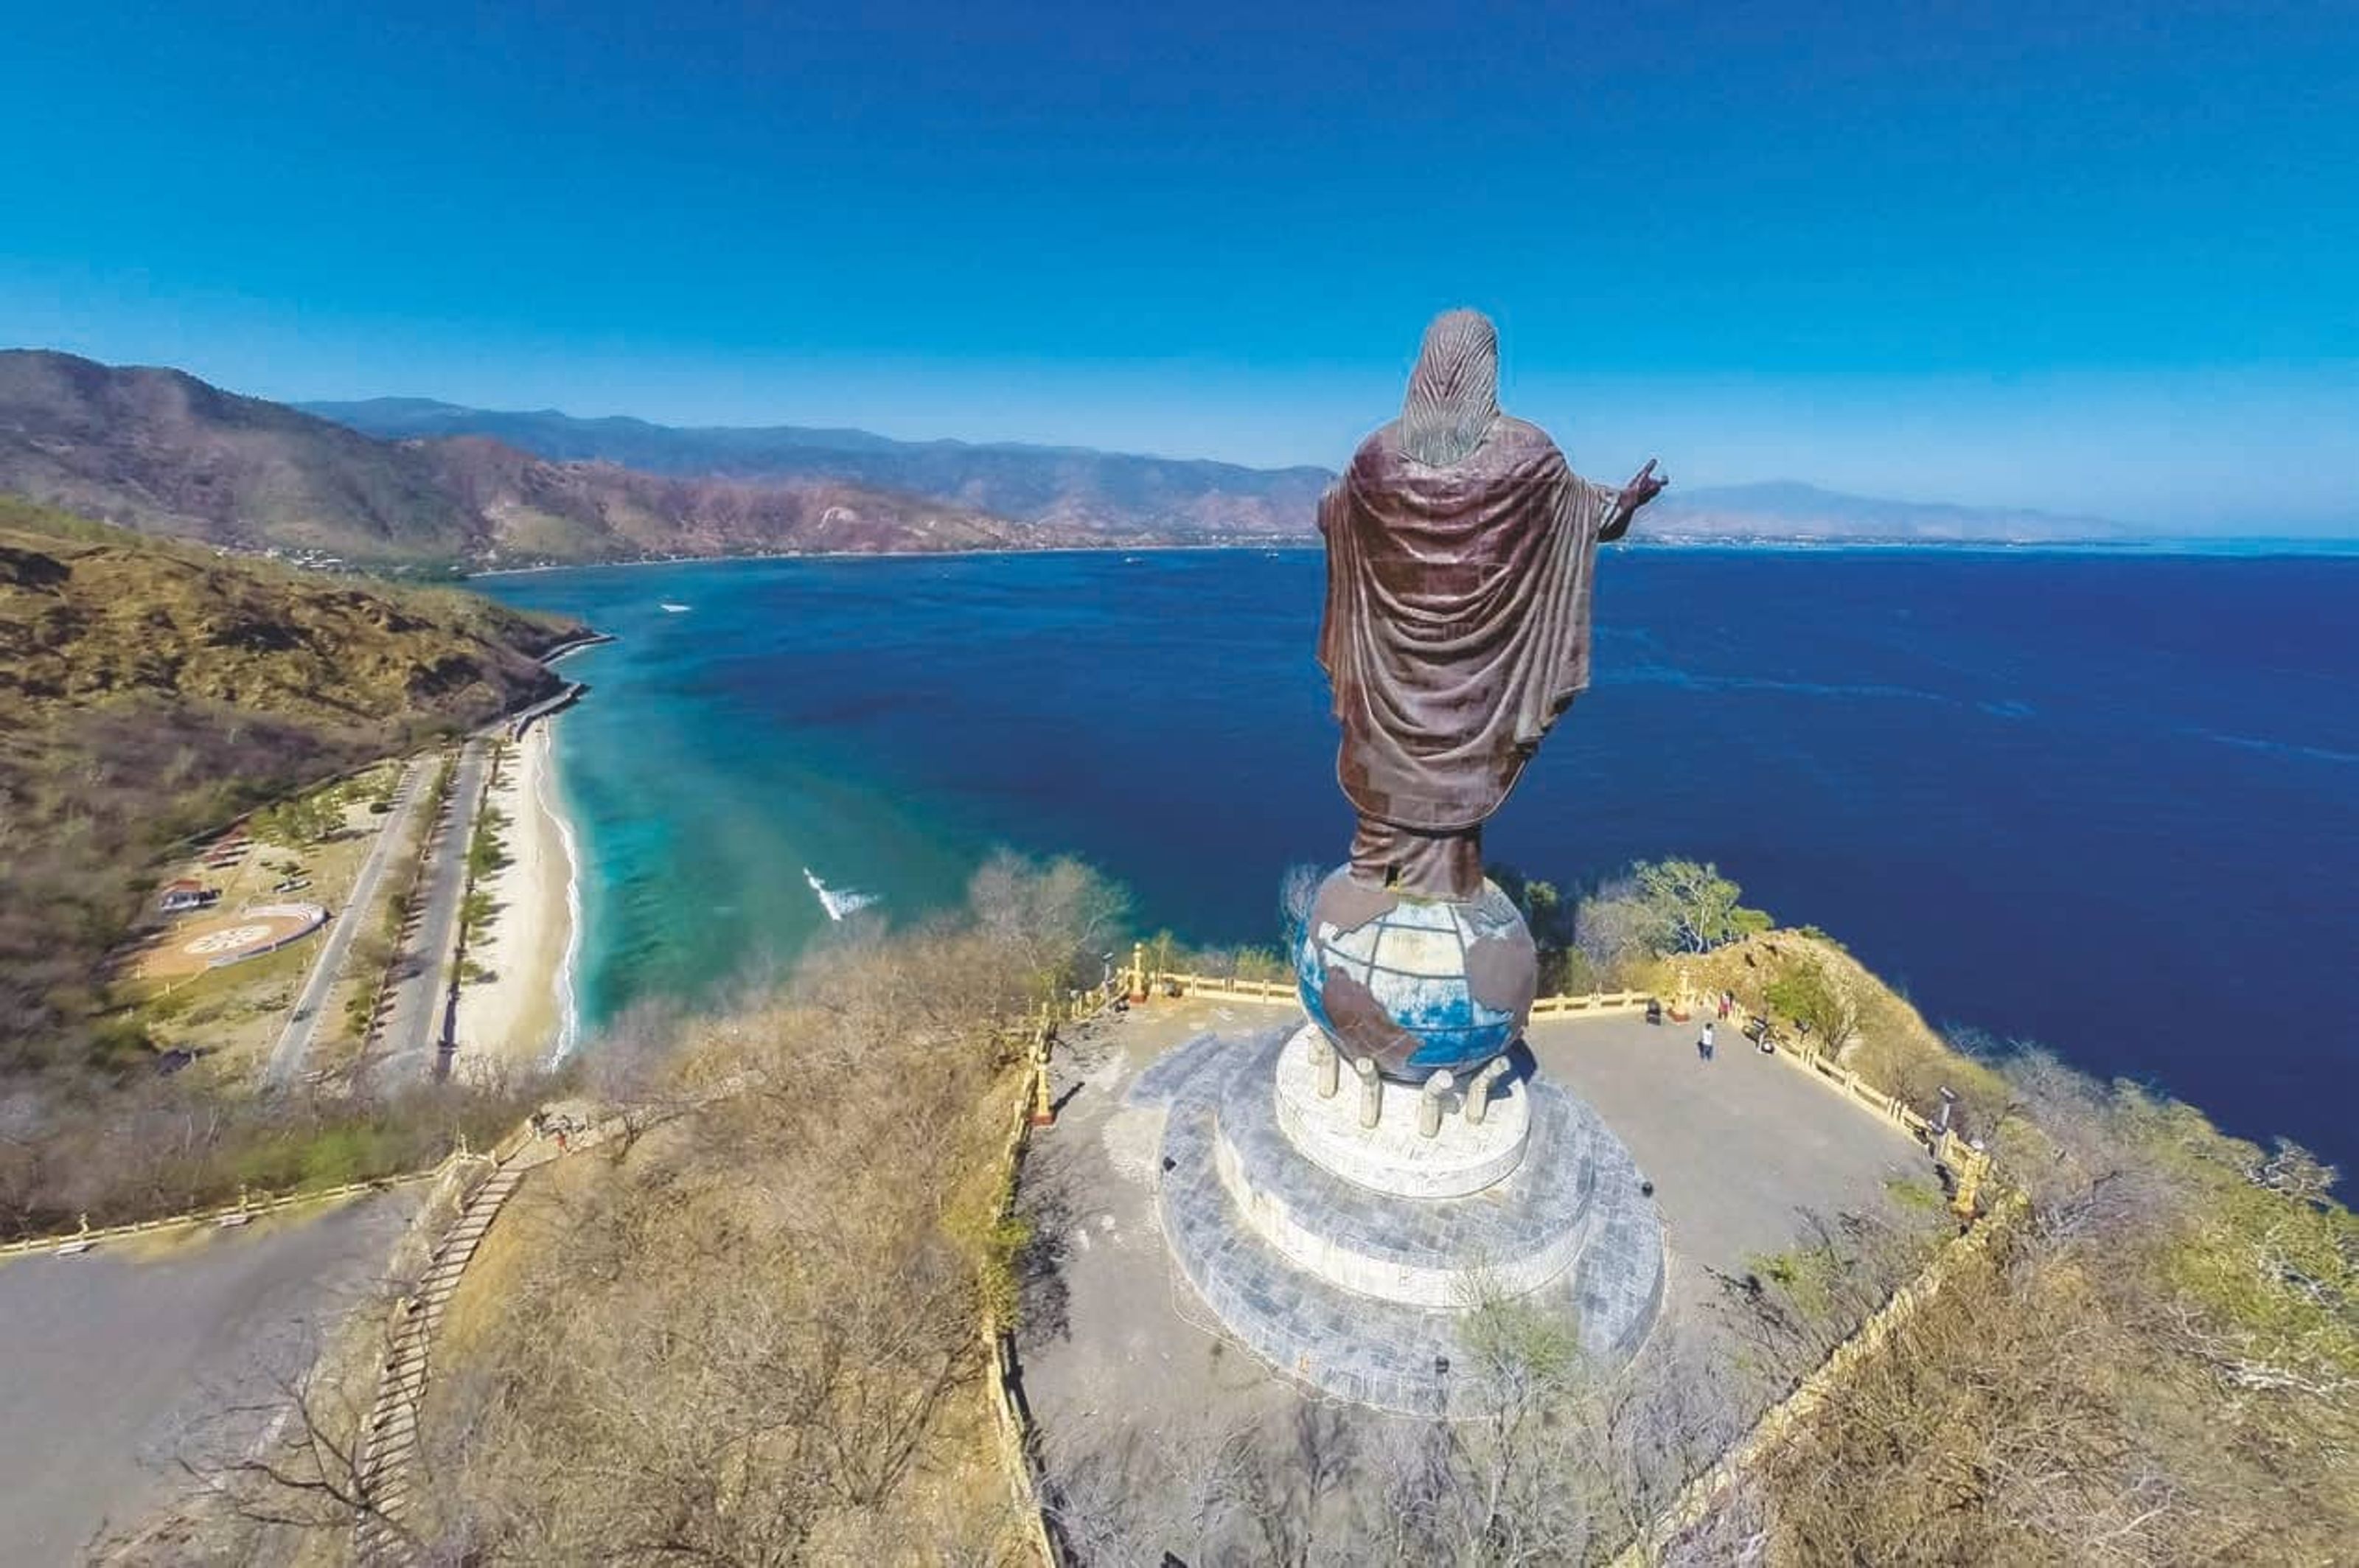 The large statue of Christ at Fatucama, Dili, after completion